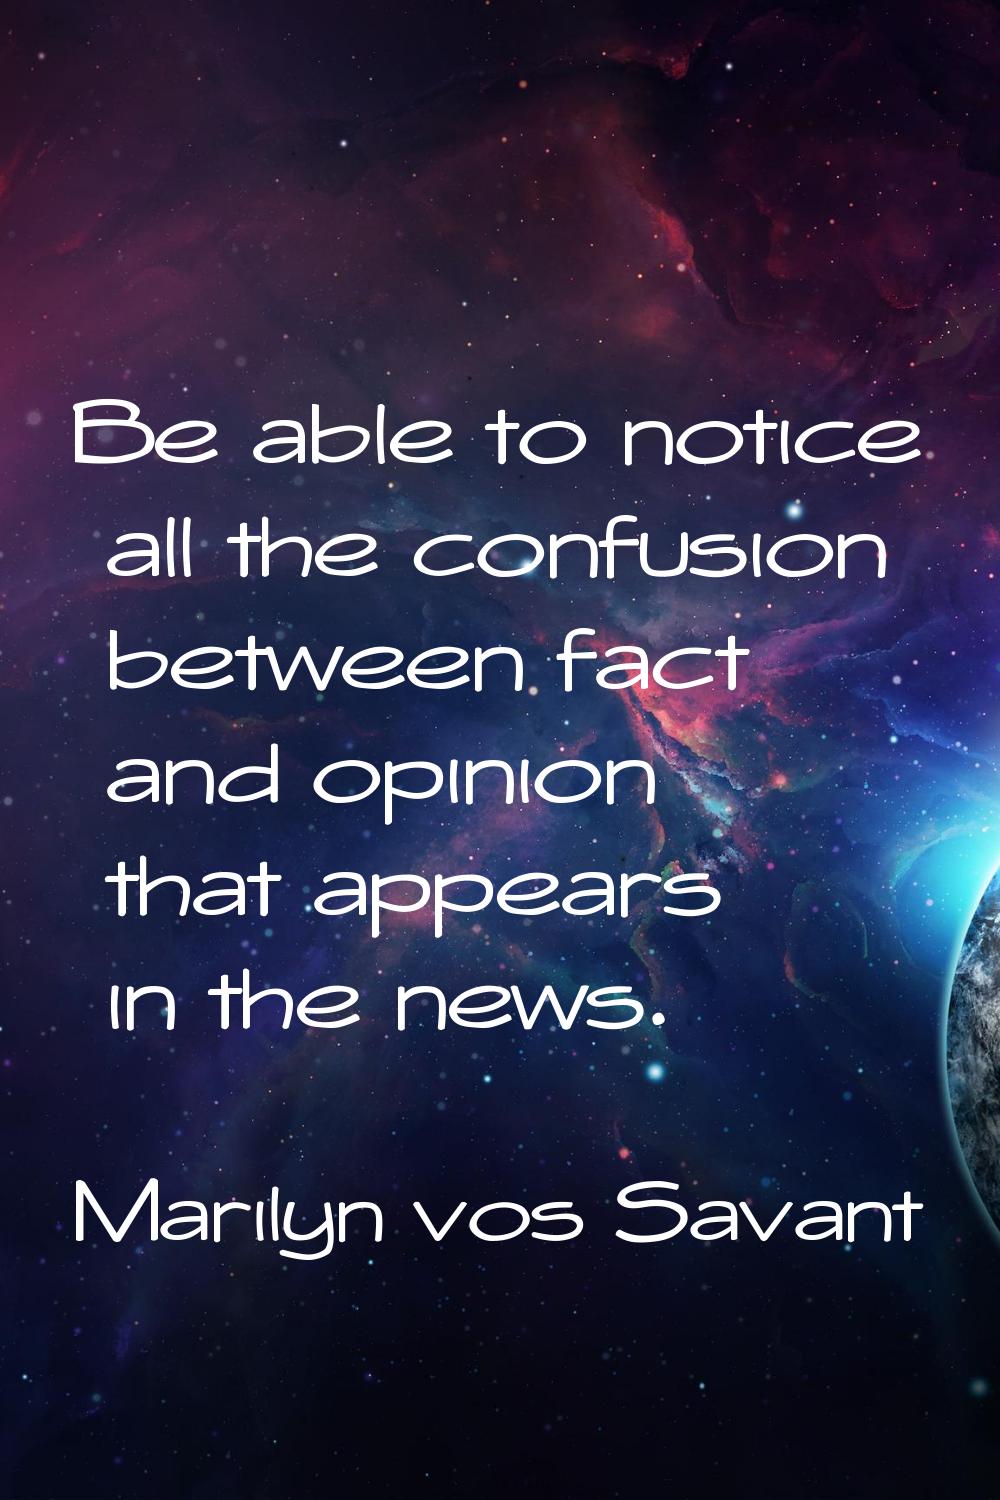 Be able to notice all the confusion between fact and opinion that appears in the news.